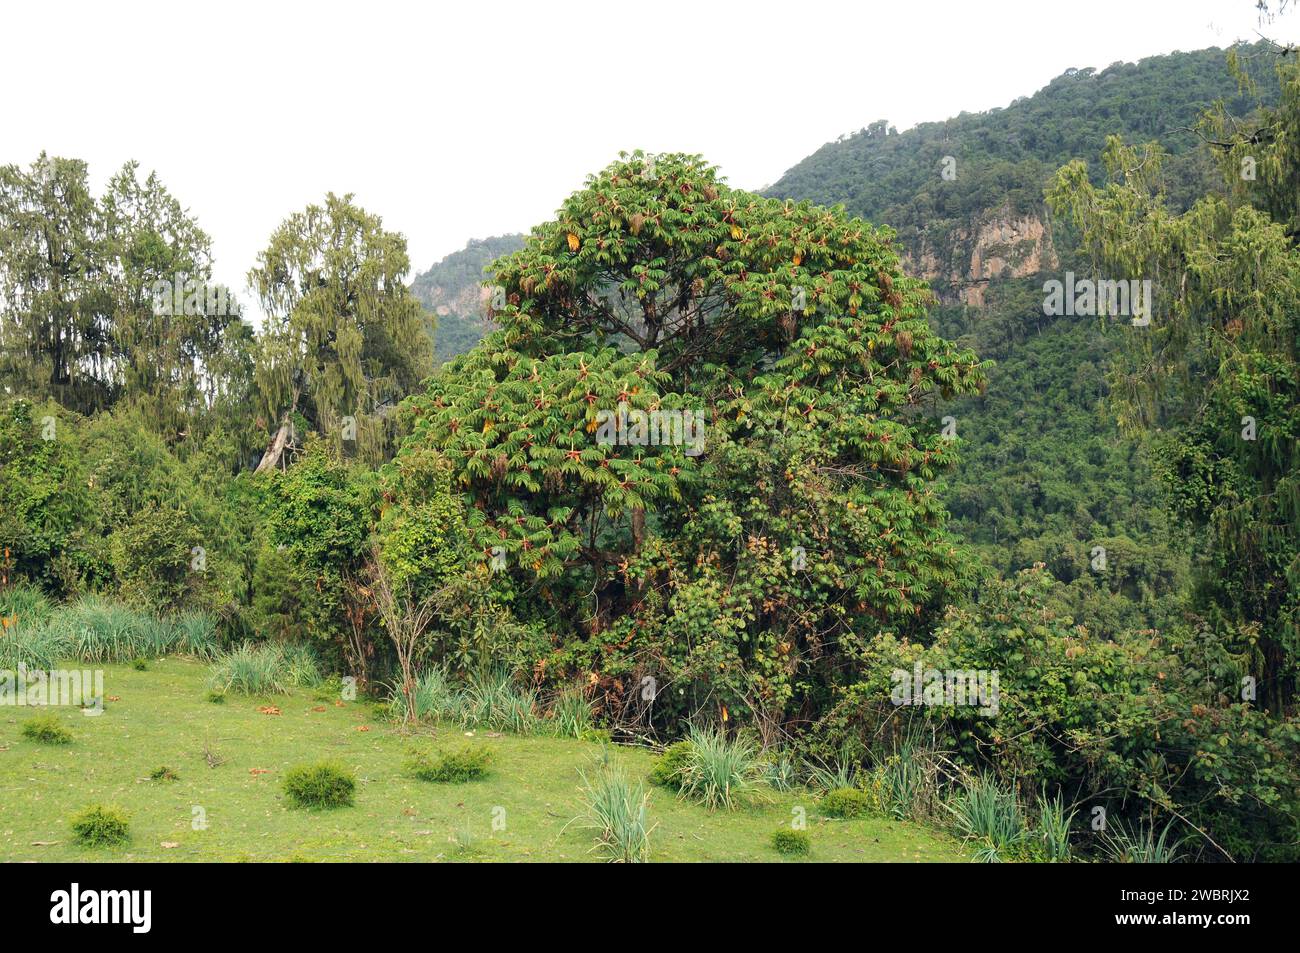 African redwood or African rosewood (Hagenia abyssinica) is a medicinal tree native to central and eastern Africa mountains. This photo was taken in S Stock Photo